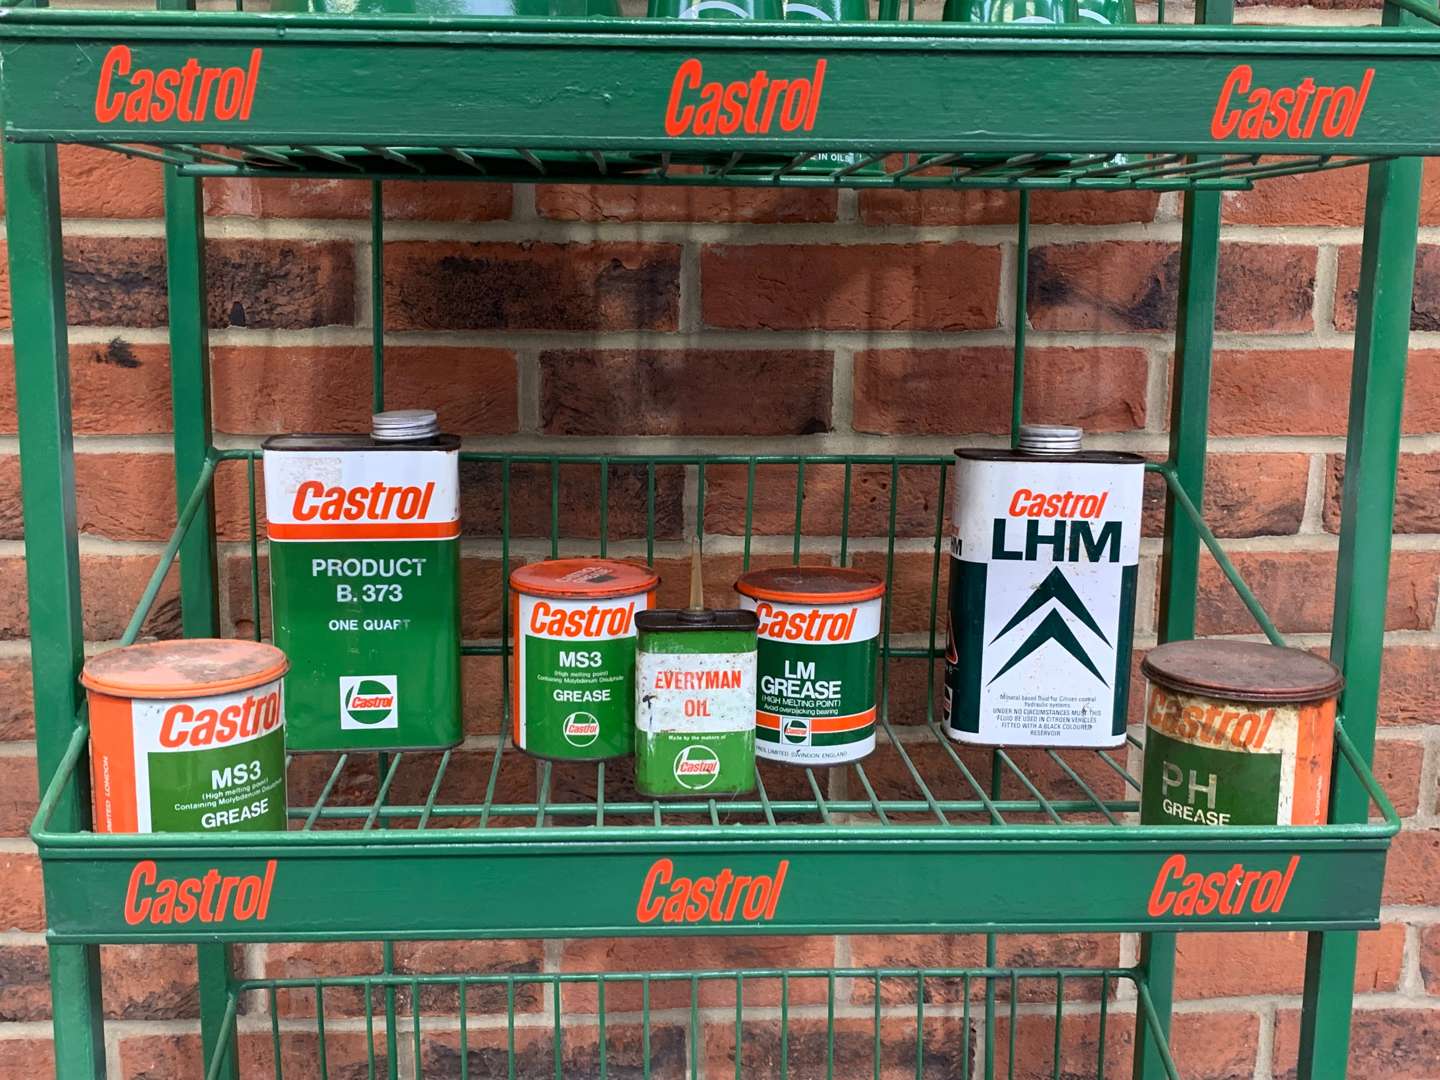 <p>Castrol Wire Work Display Rack and a Quantity of Oil Cans and Jugs</p>